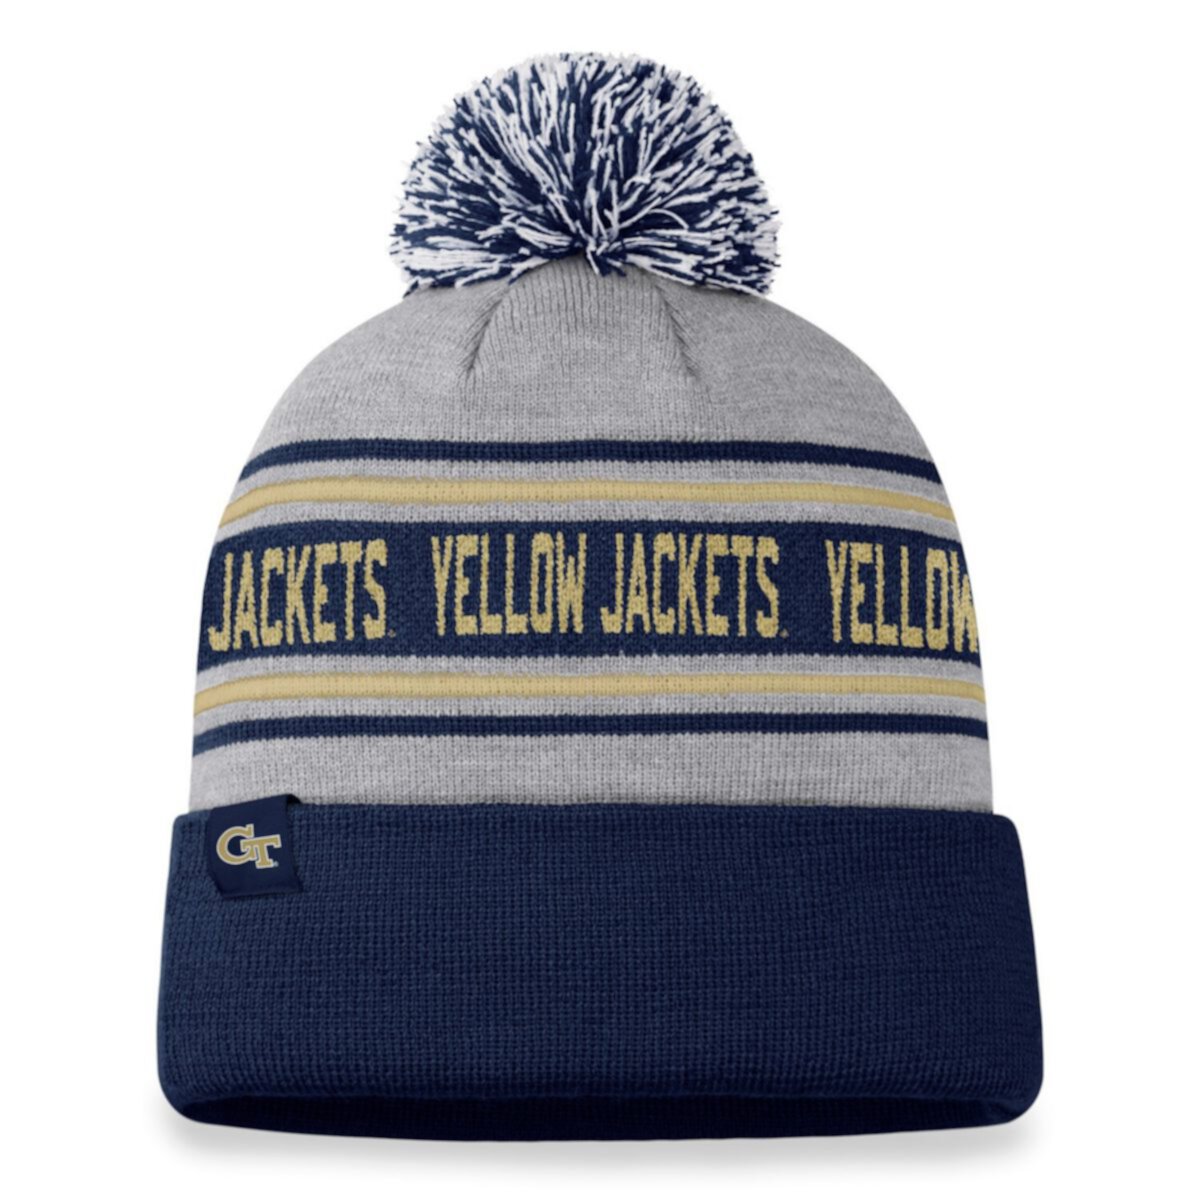 Men's Top of the World Heather Gray Georgia Tech Yellow Jackets Frigid Cuffed Knit Hat with Pom Top of the World